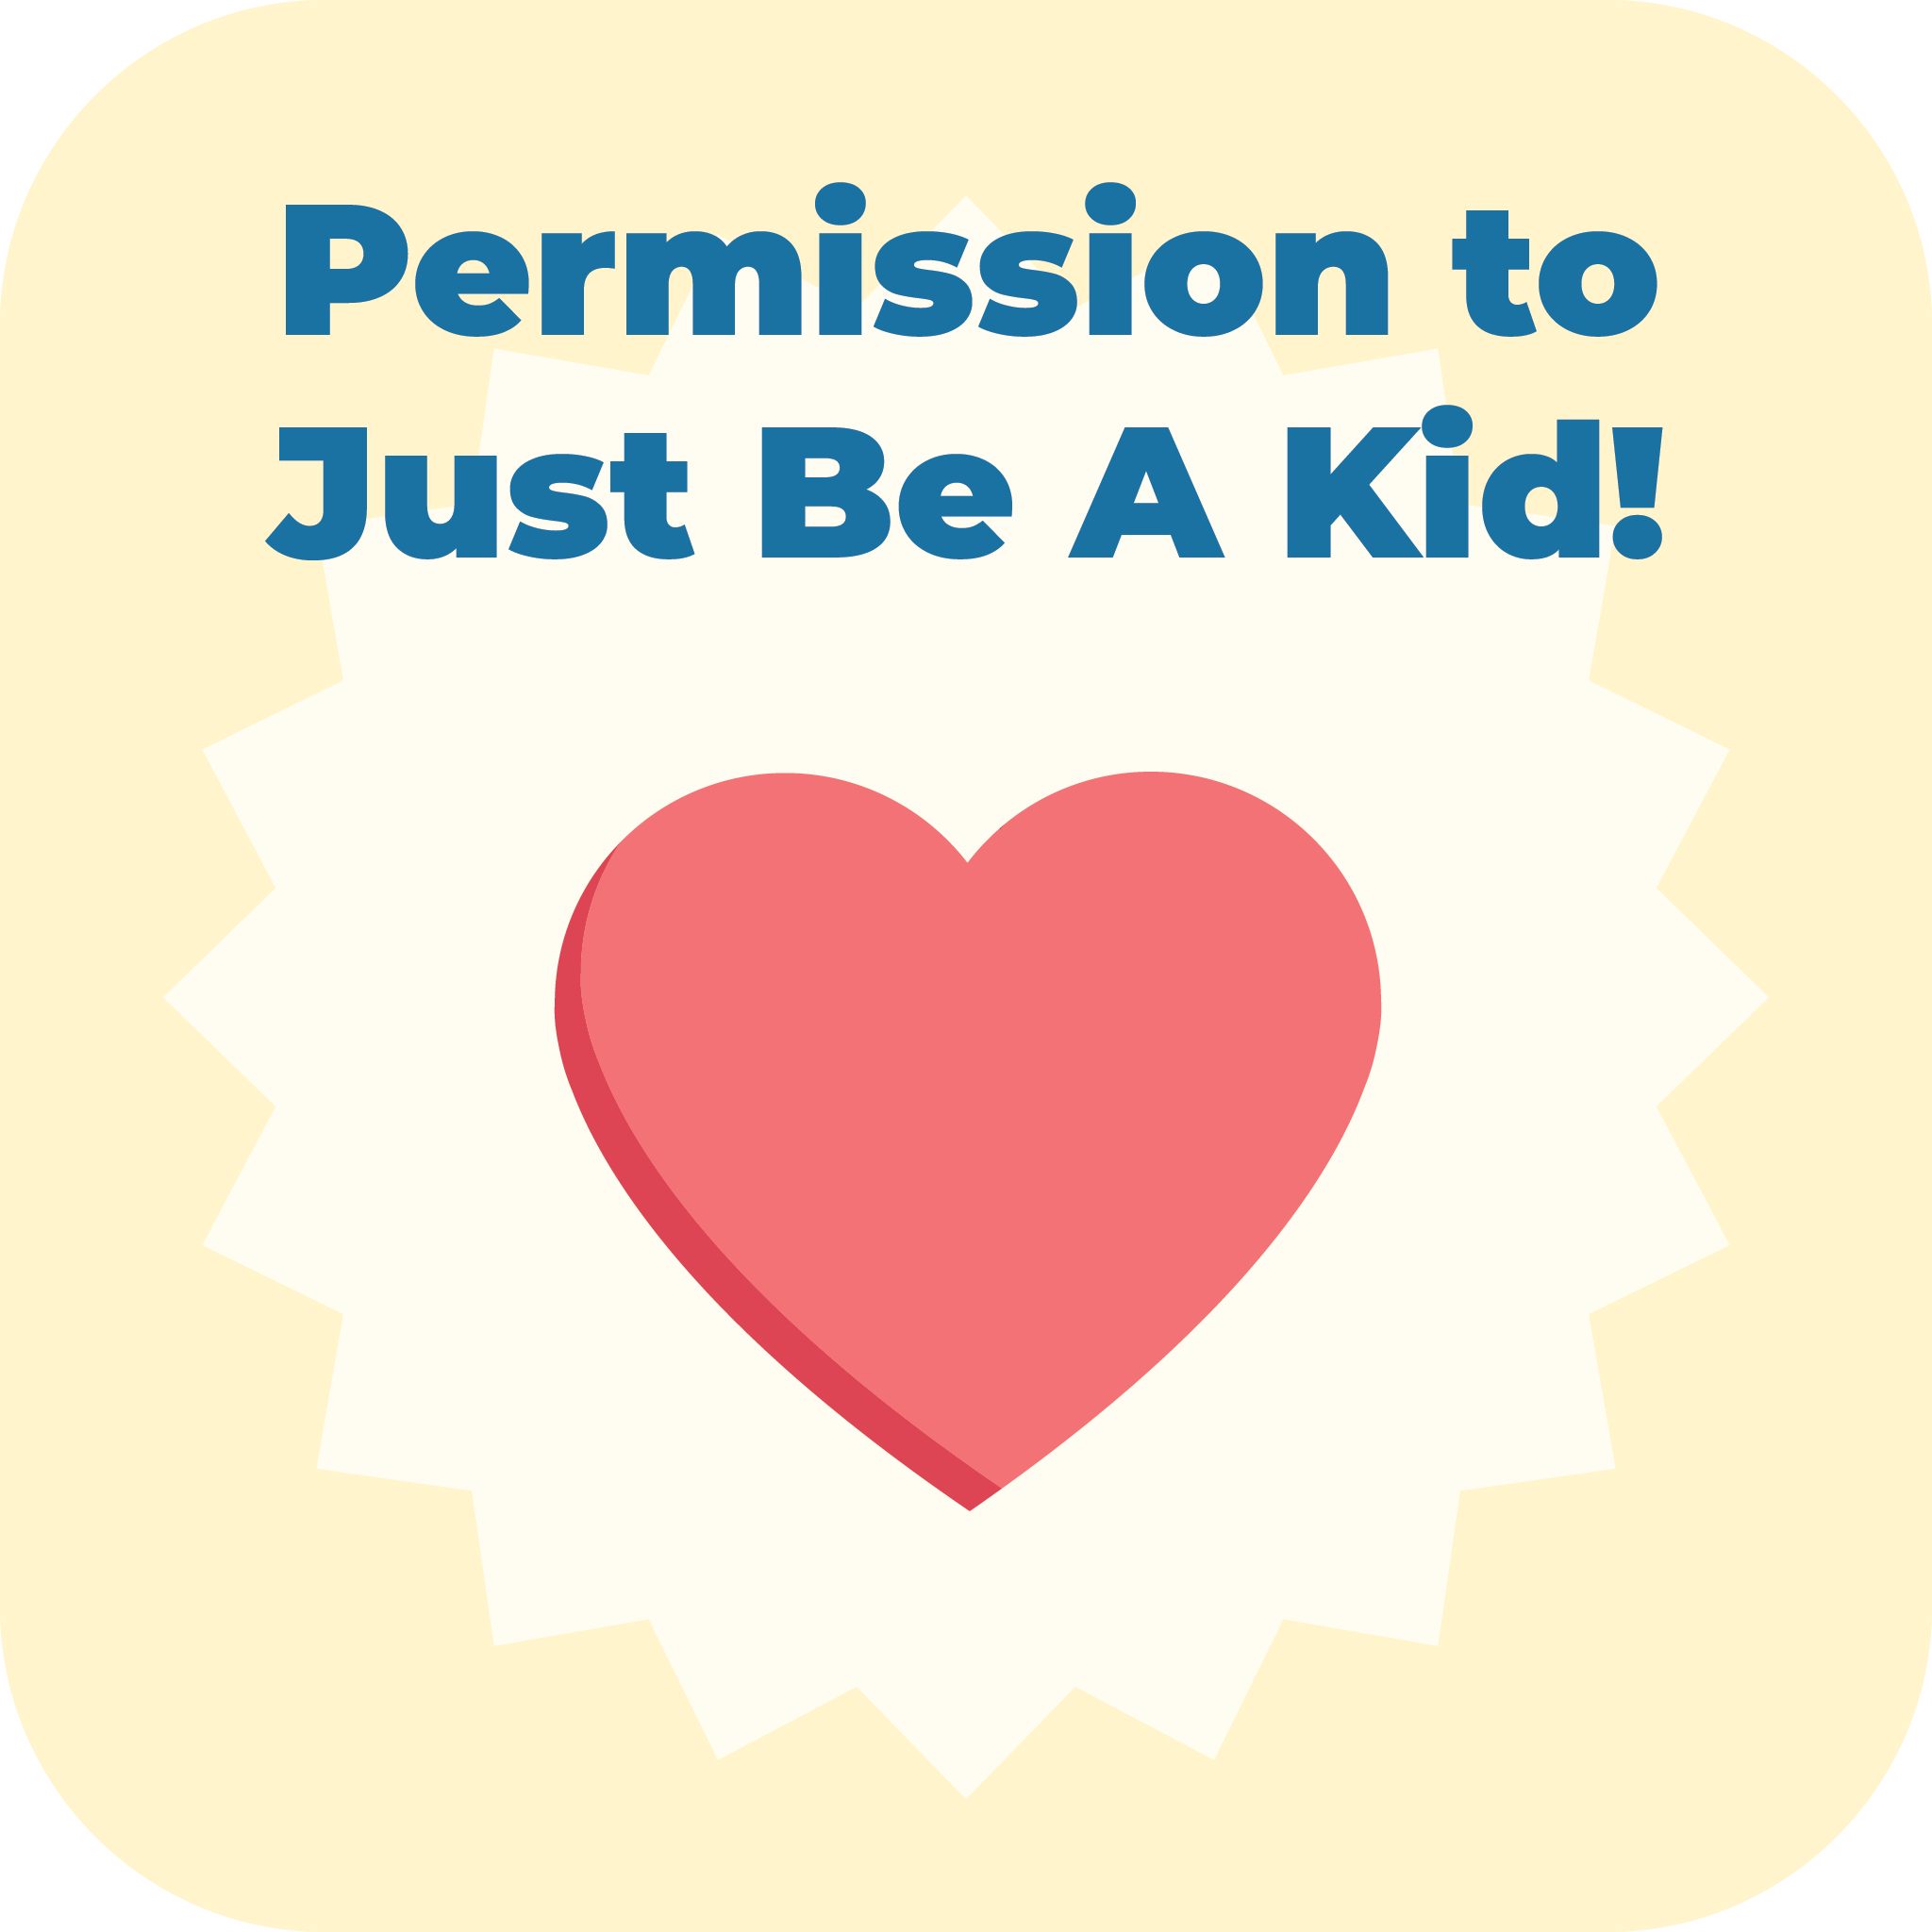 Permission to just be a kid.